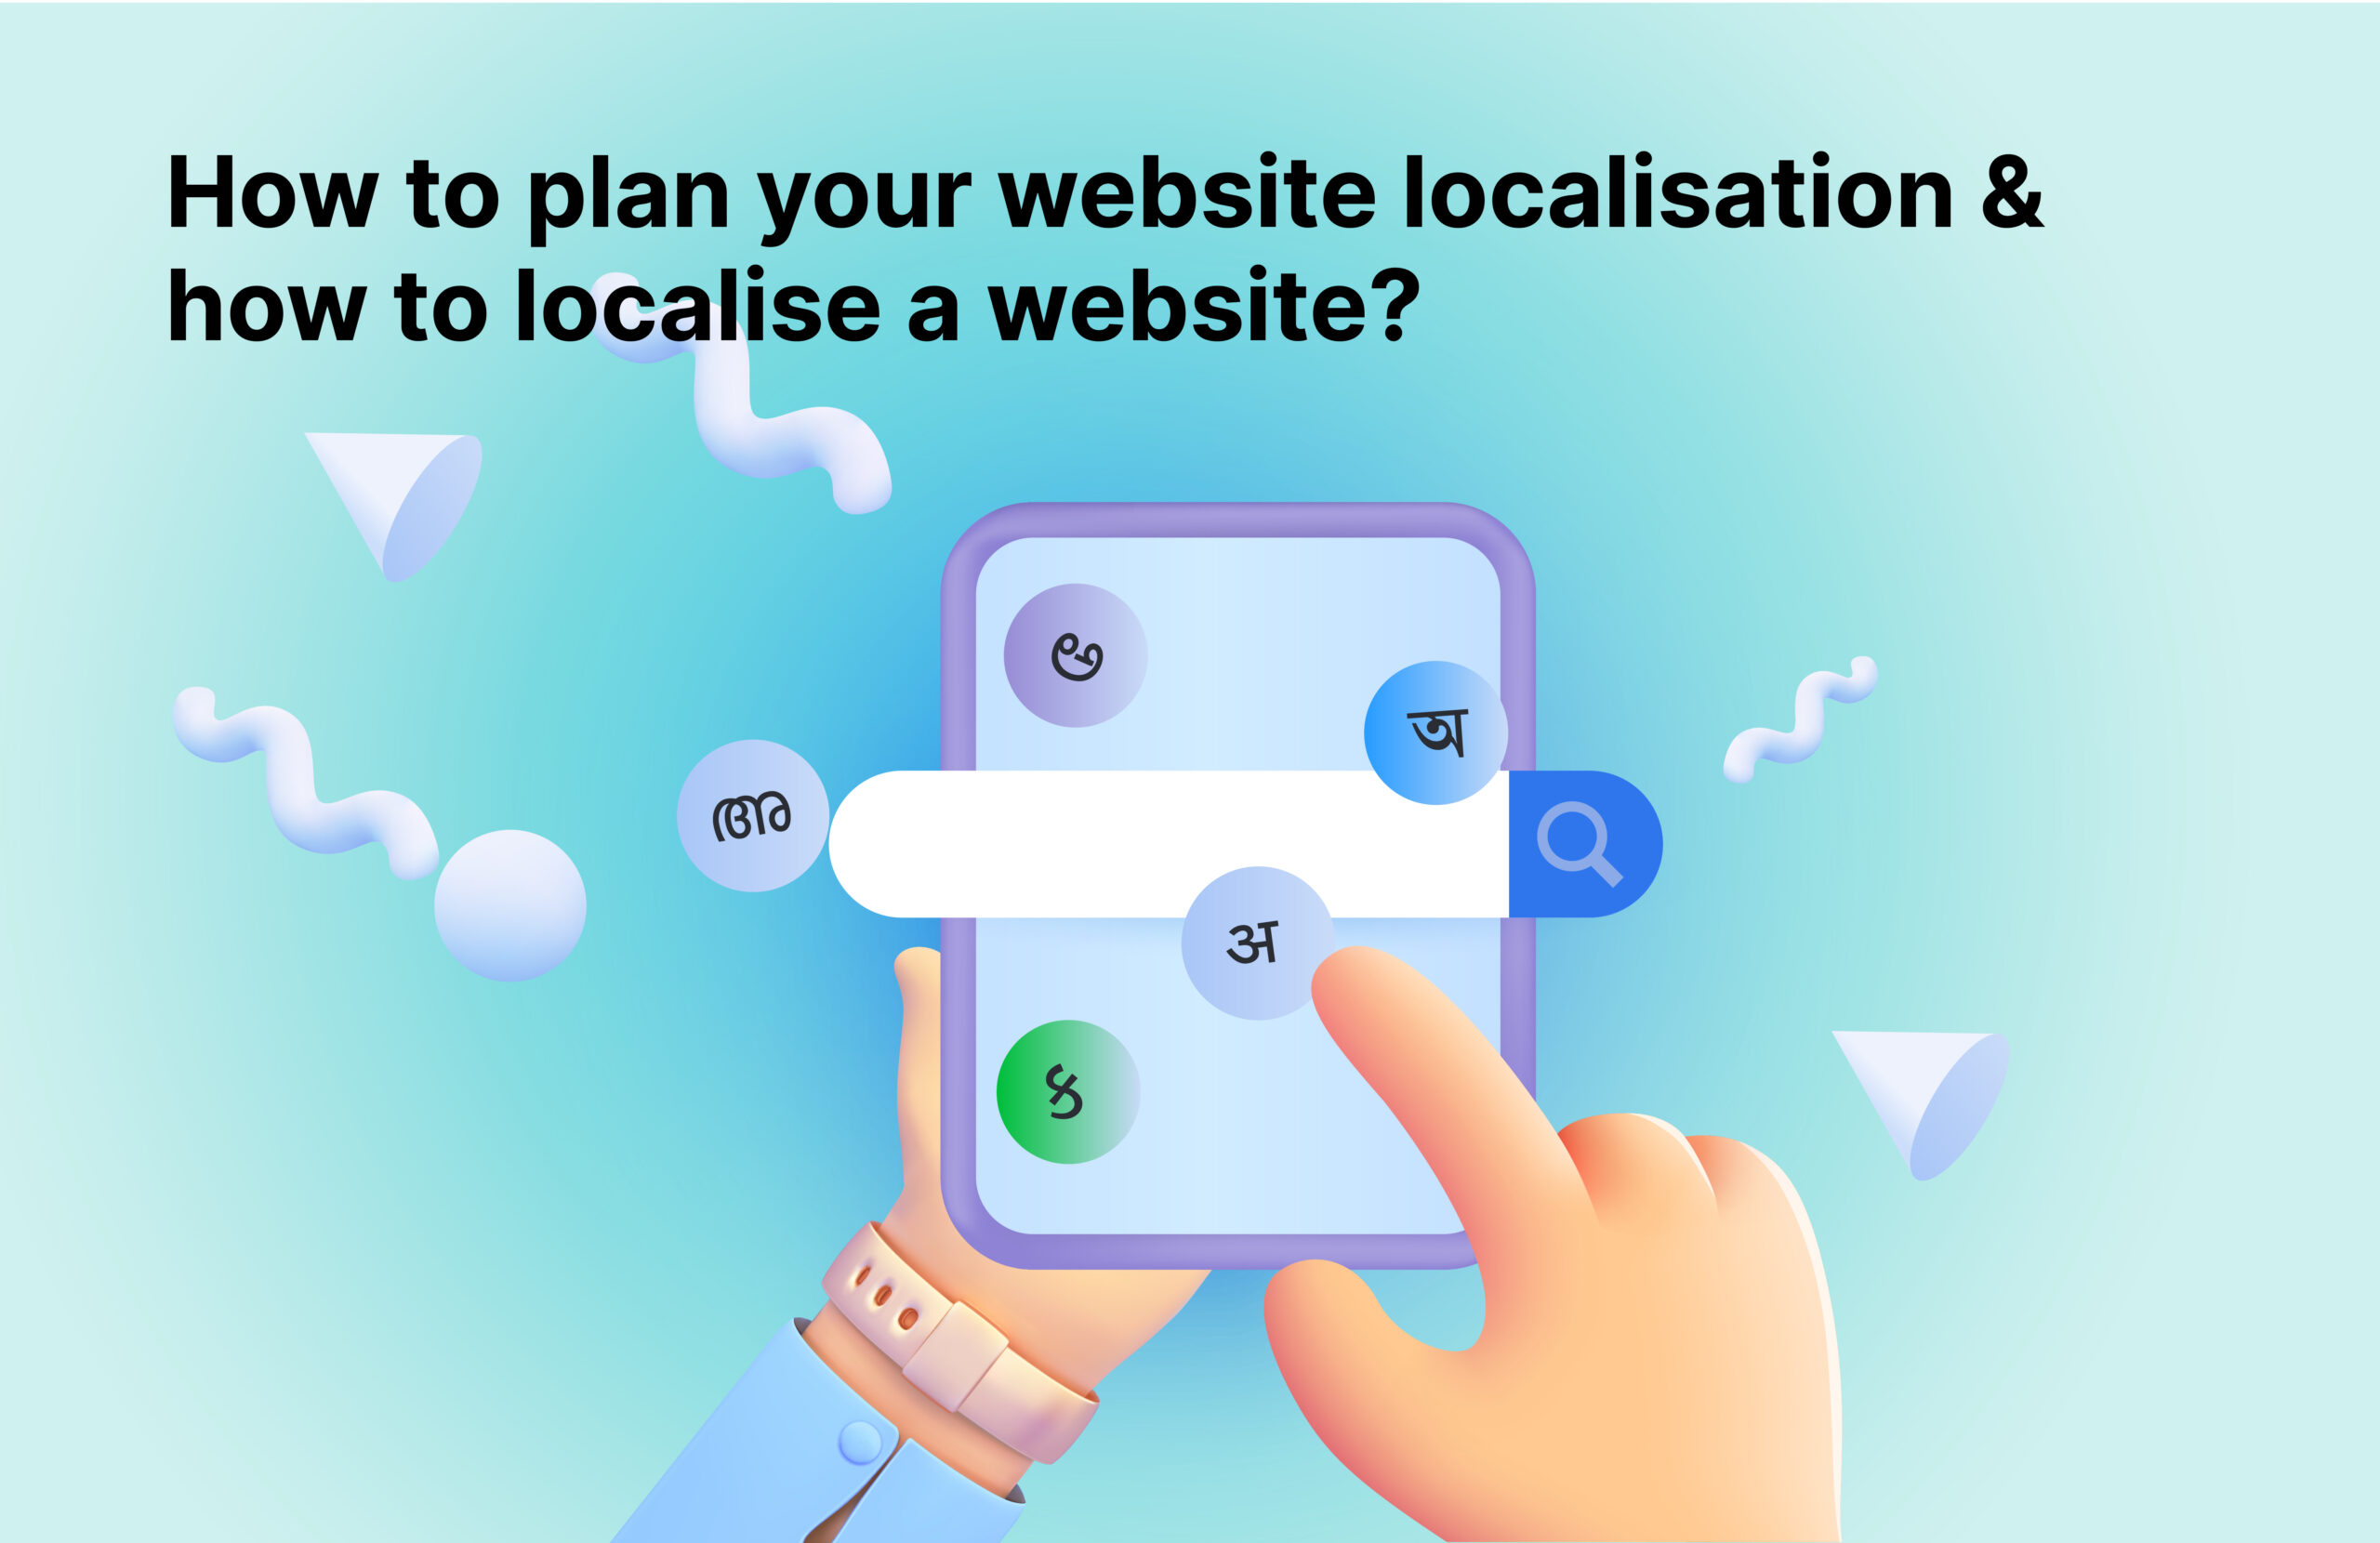 How to plan your website localisation & how to localise a website